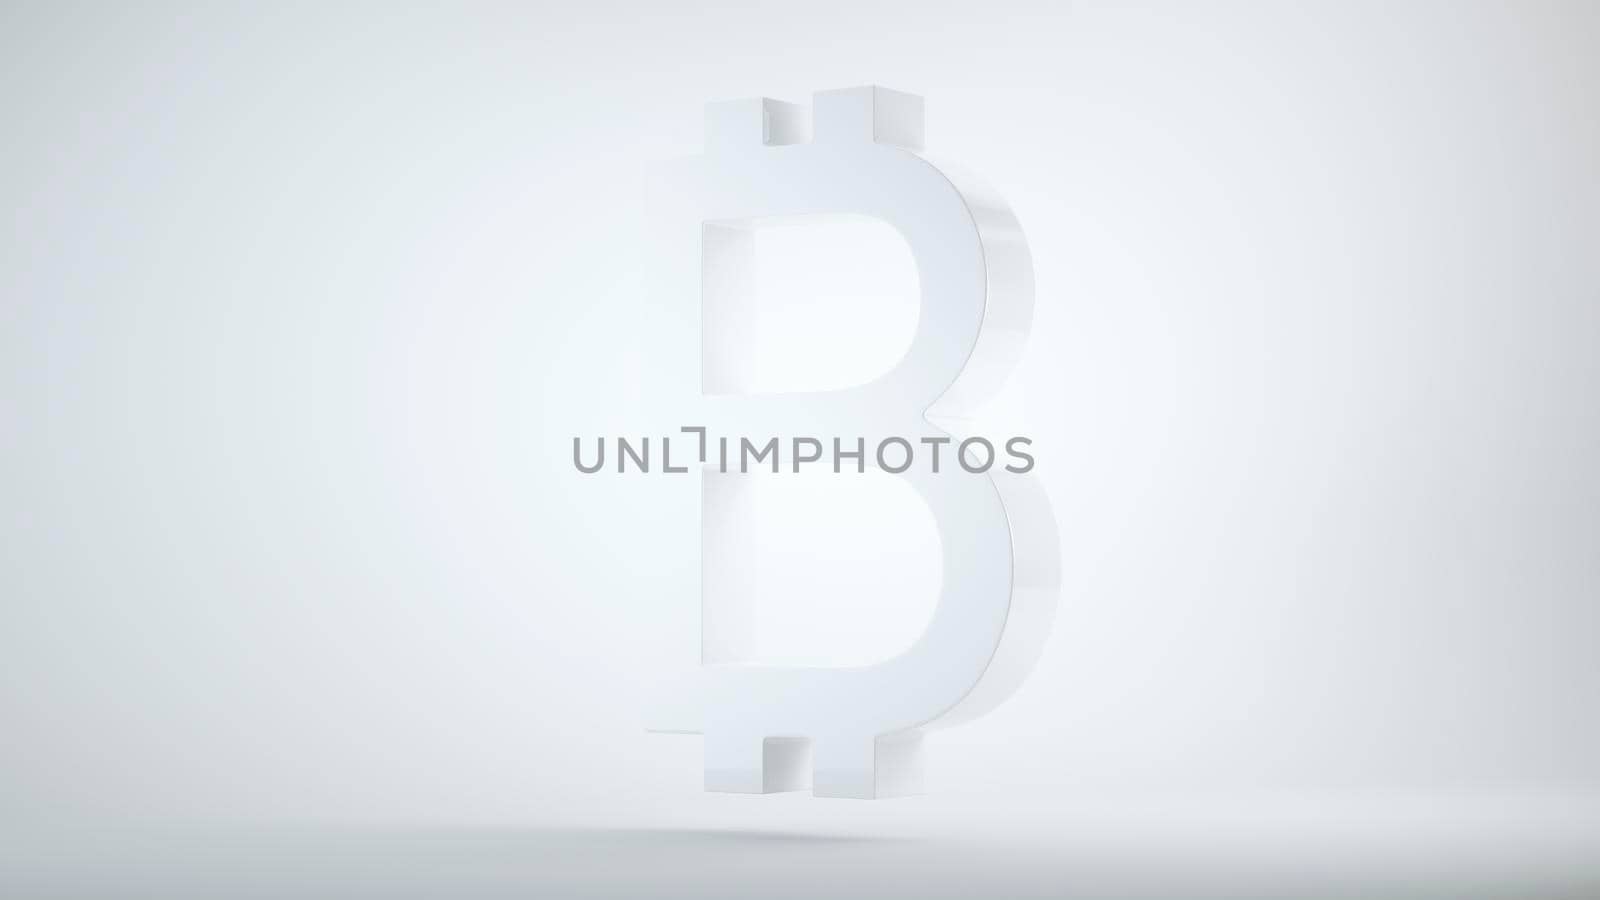 bitcoin cryptocurrency symbol on grey background by Arsgera